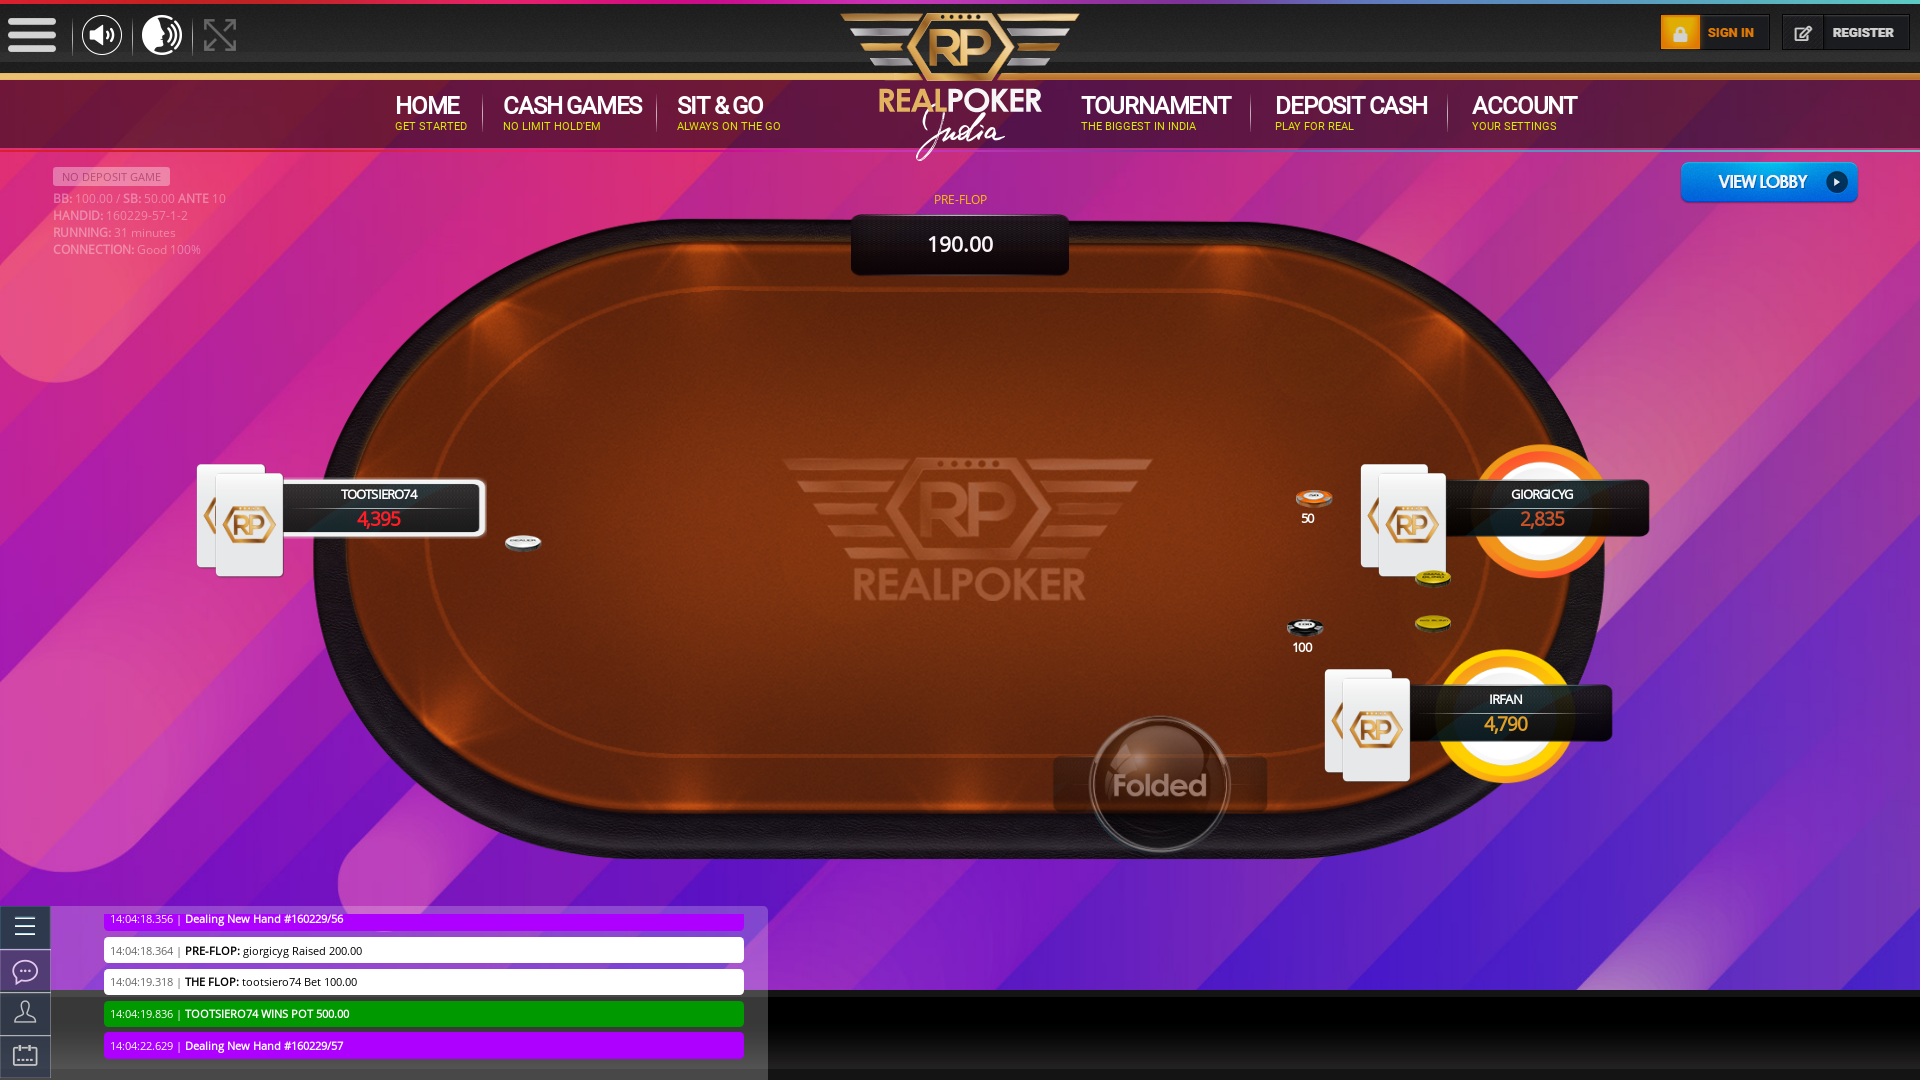 Indian poker on a 10 player table in the 31st minute